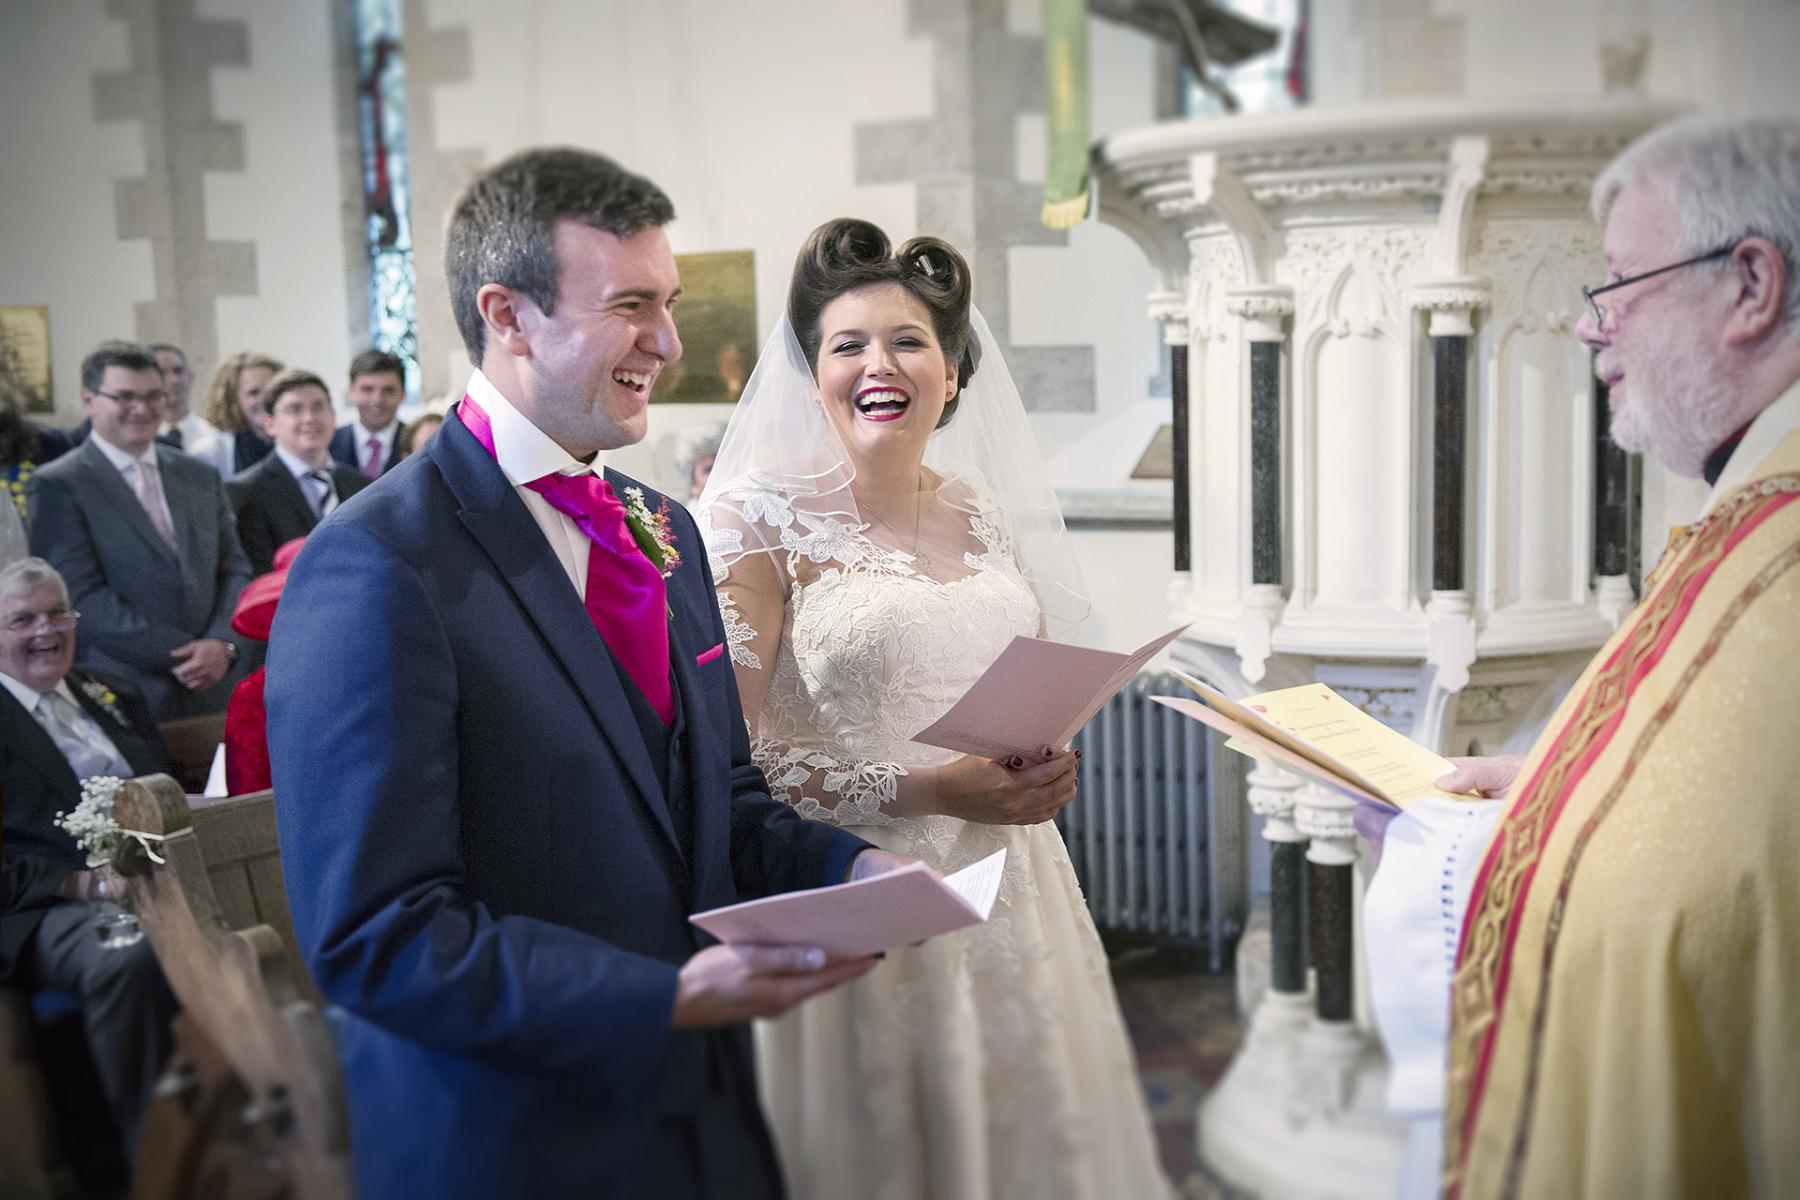 wedding-laughing-bride-groom-reportage-wedding-photography-south-wales-St-teilo's